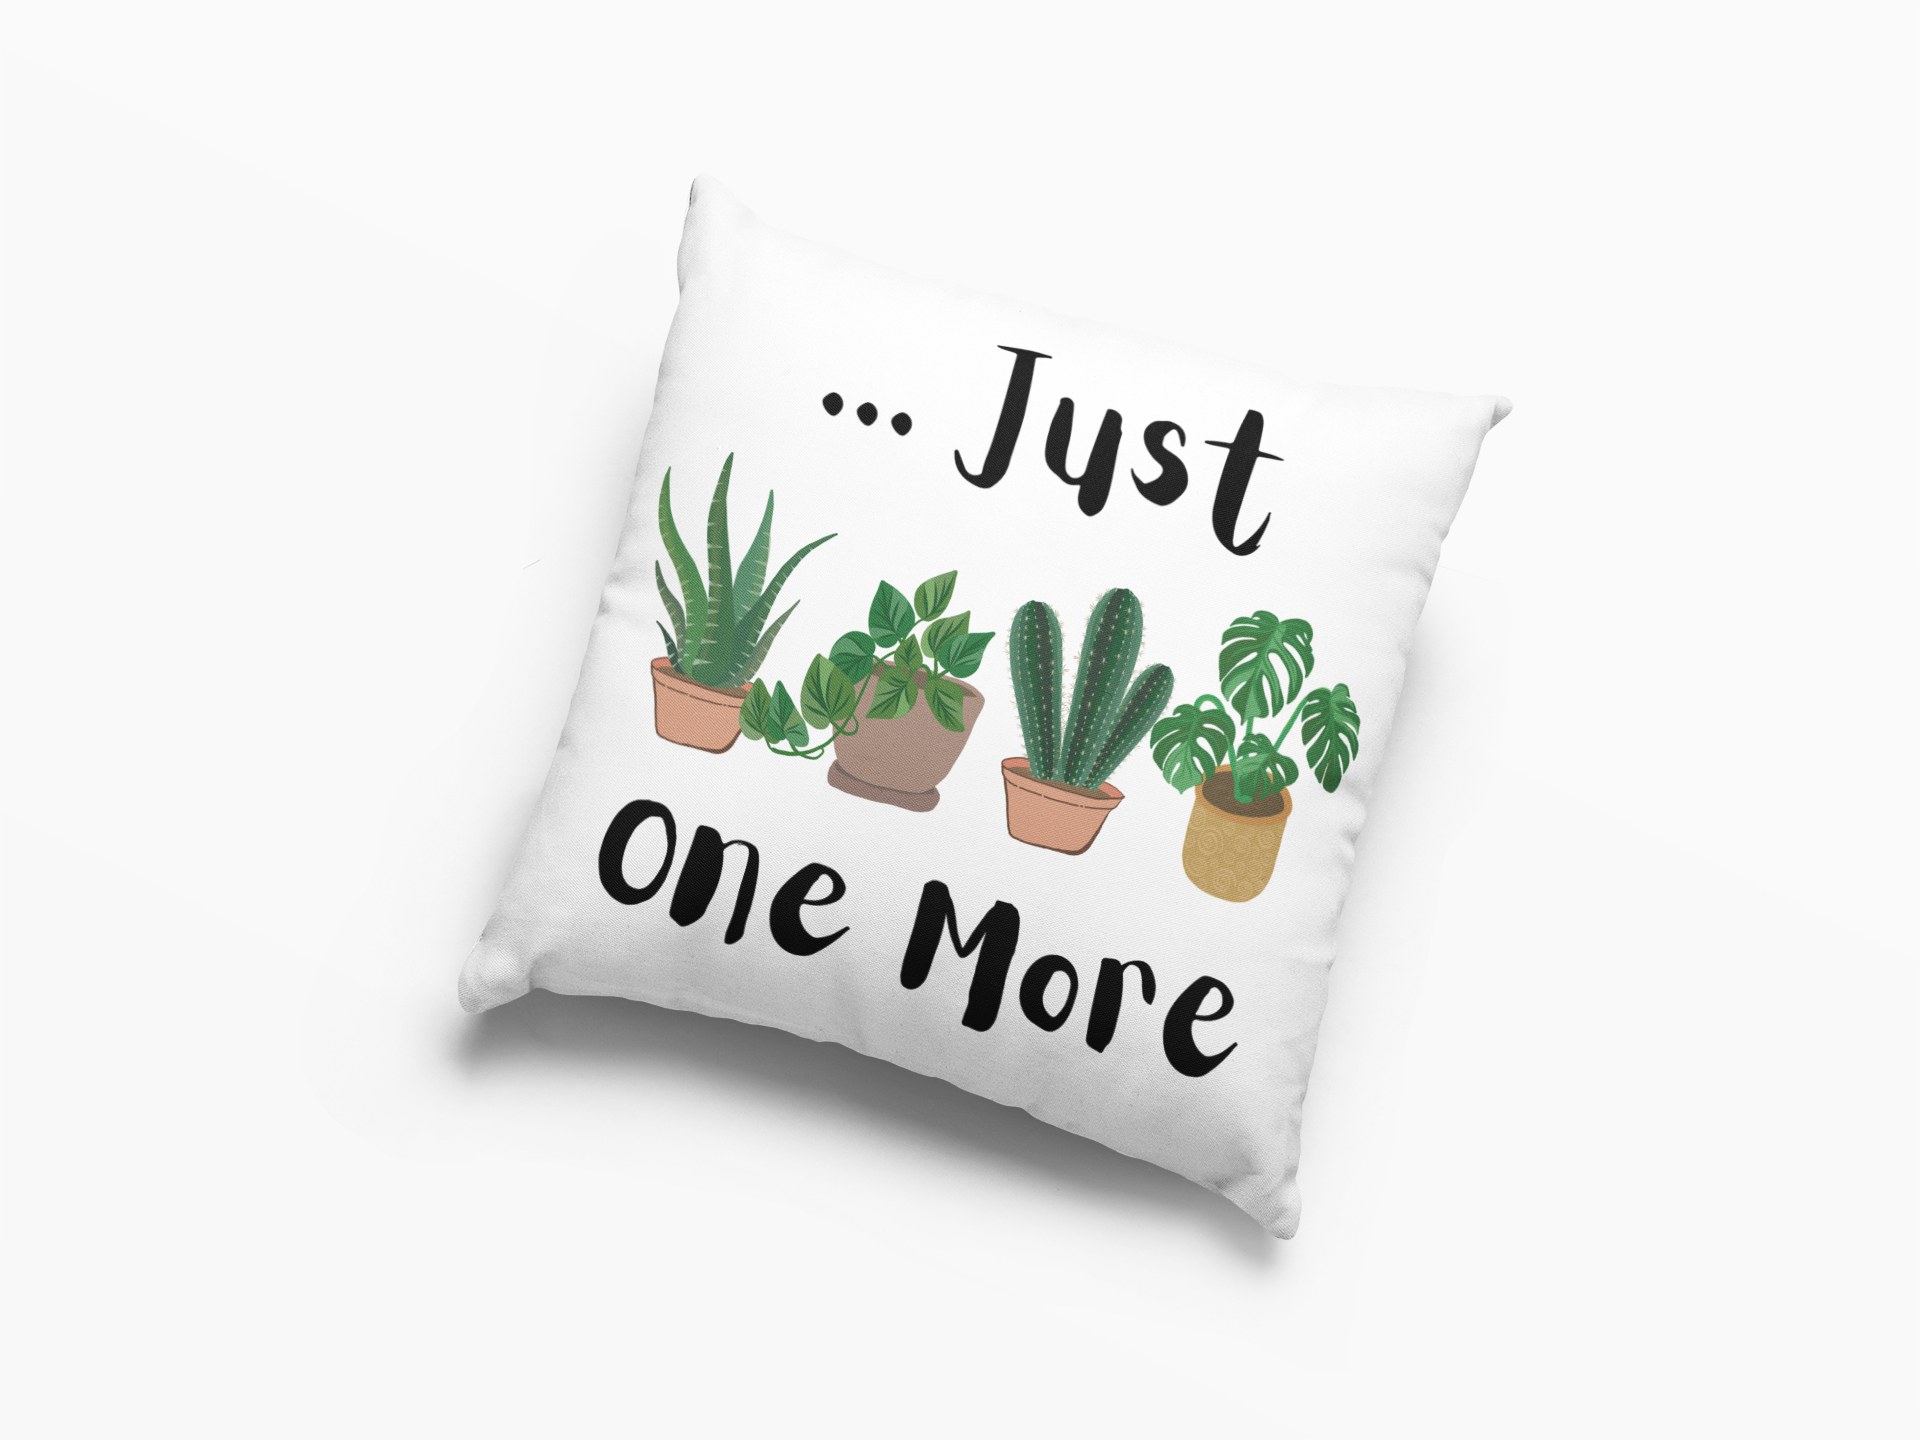 Just one more plant Pillow, Gardening Pillow, Plants lovers Ceramic Pillow, Funny House Plant Pillow, Plant Botanical Pillow, Funny Plant Pillow, Plant Lover Pillow, Plant Lover Gift, Botanical Lover Gift